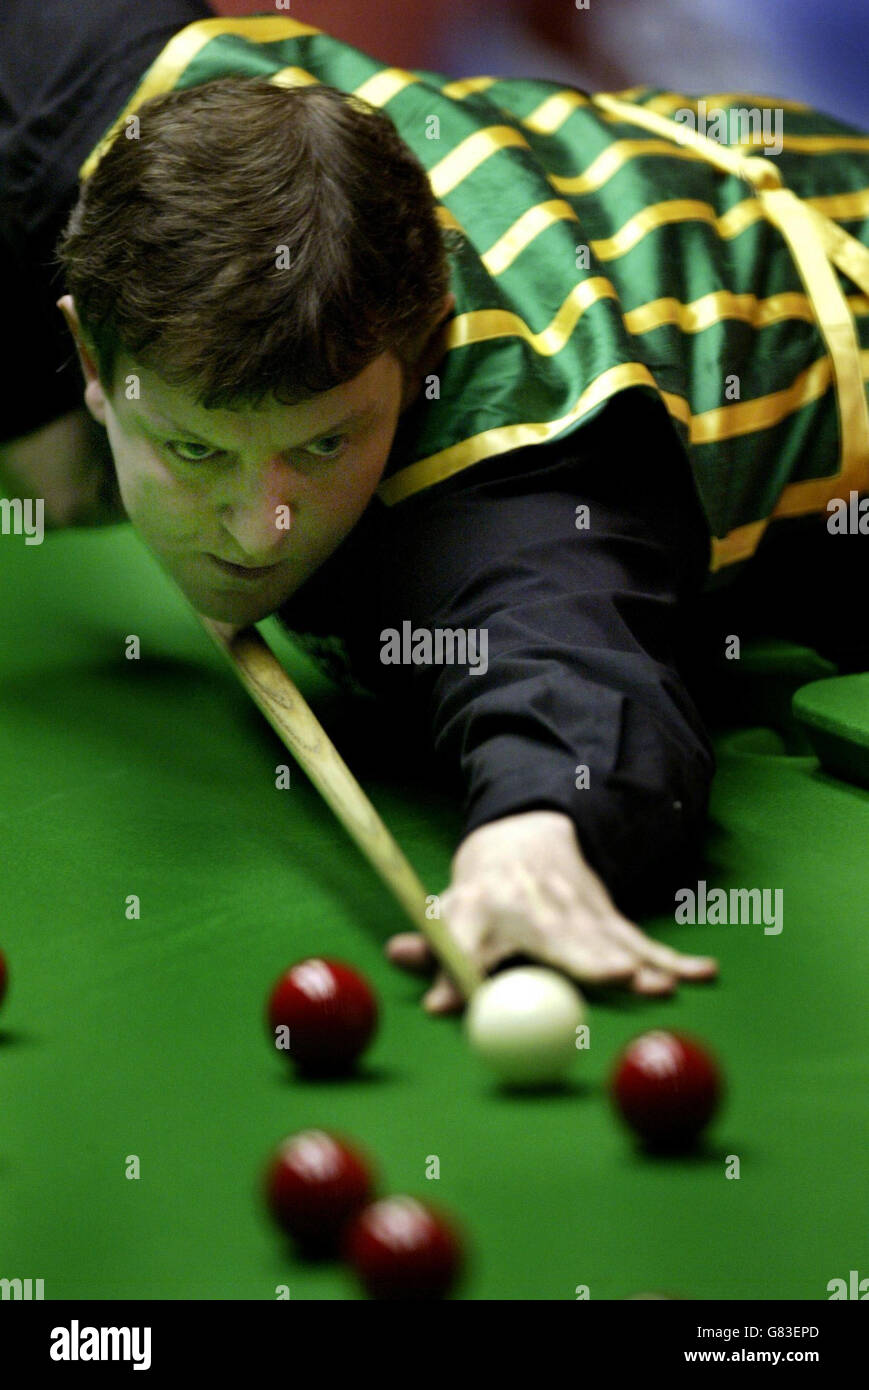 Snooker - Embassy World Championship 2005 - First Round - Barry Pinches v Ken Doherty - The Crucible. Barry Pinches in action against Ken Doherty during the first round. Stock Photo